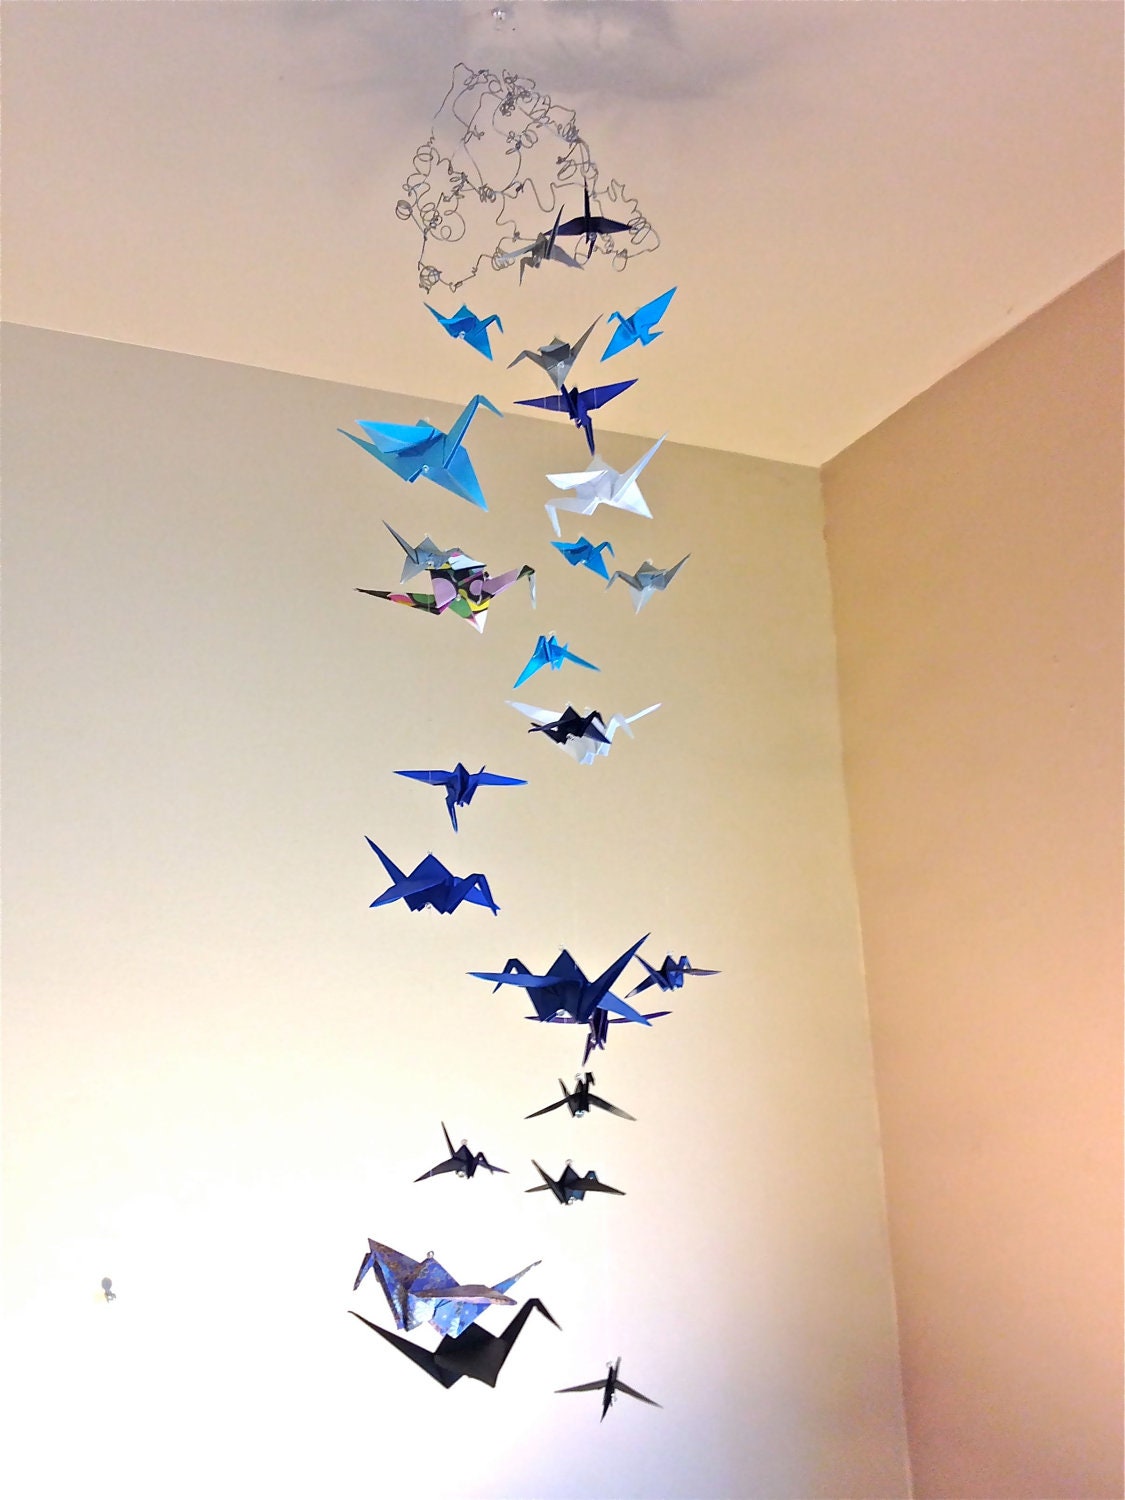 Origami Crane Mobile Hanging From Swirly WIre